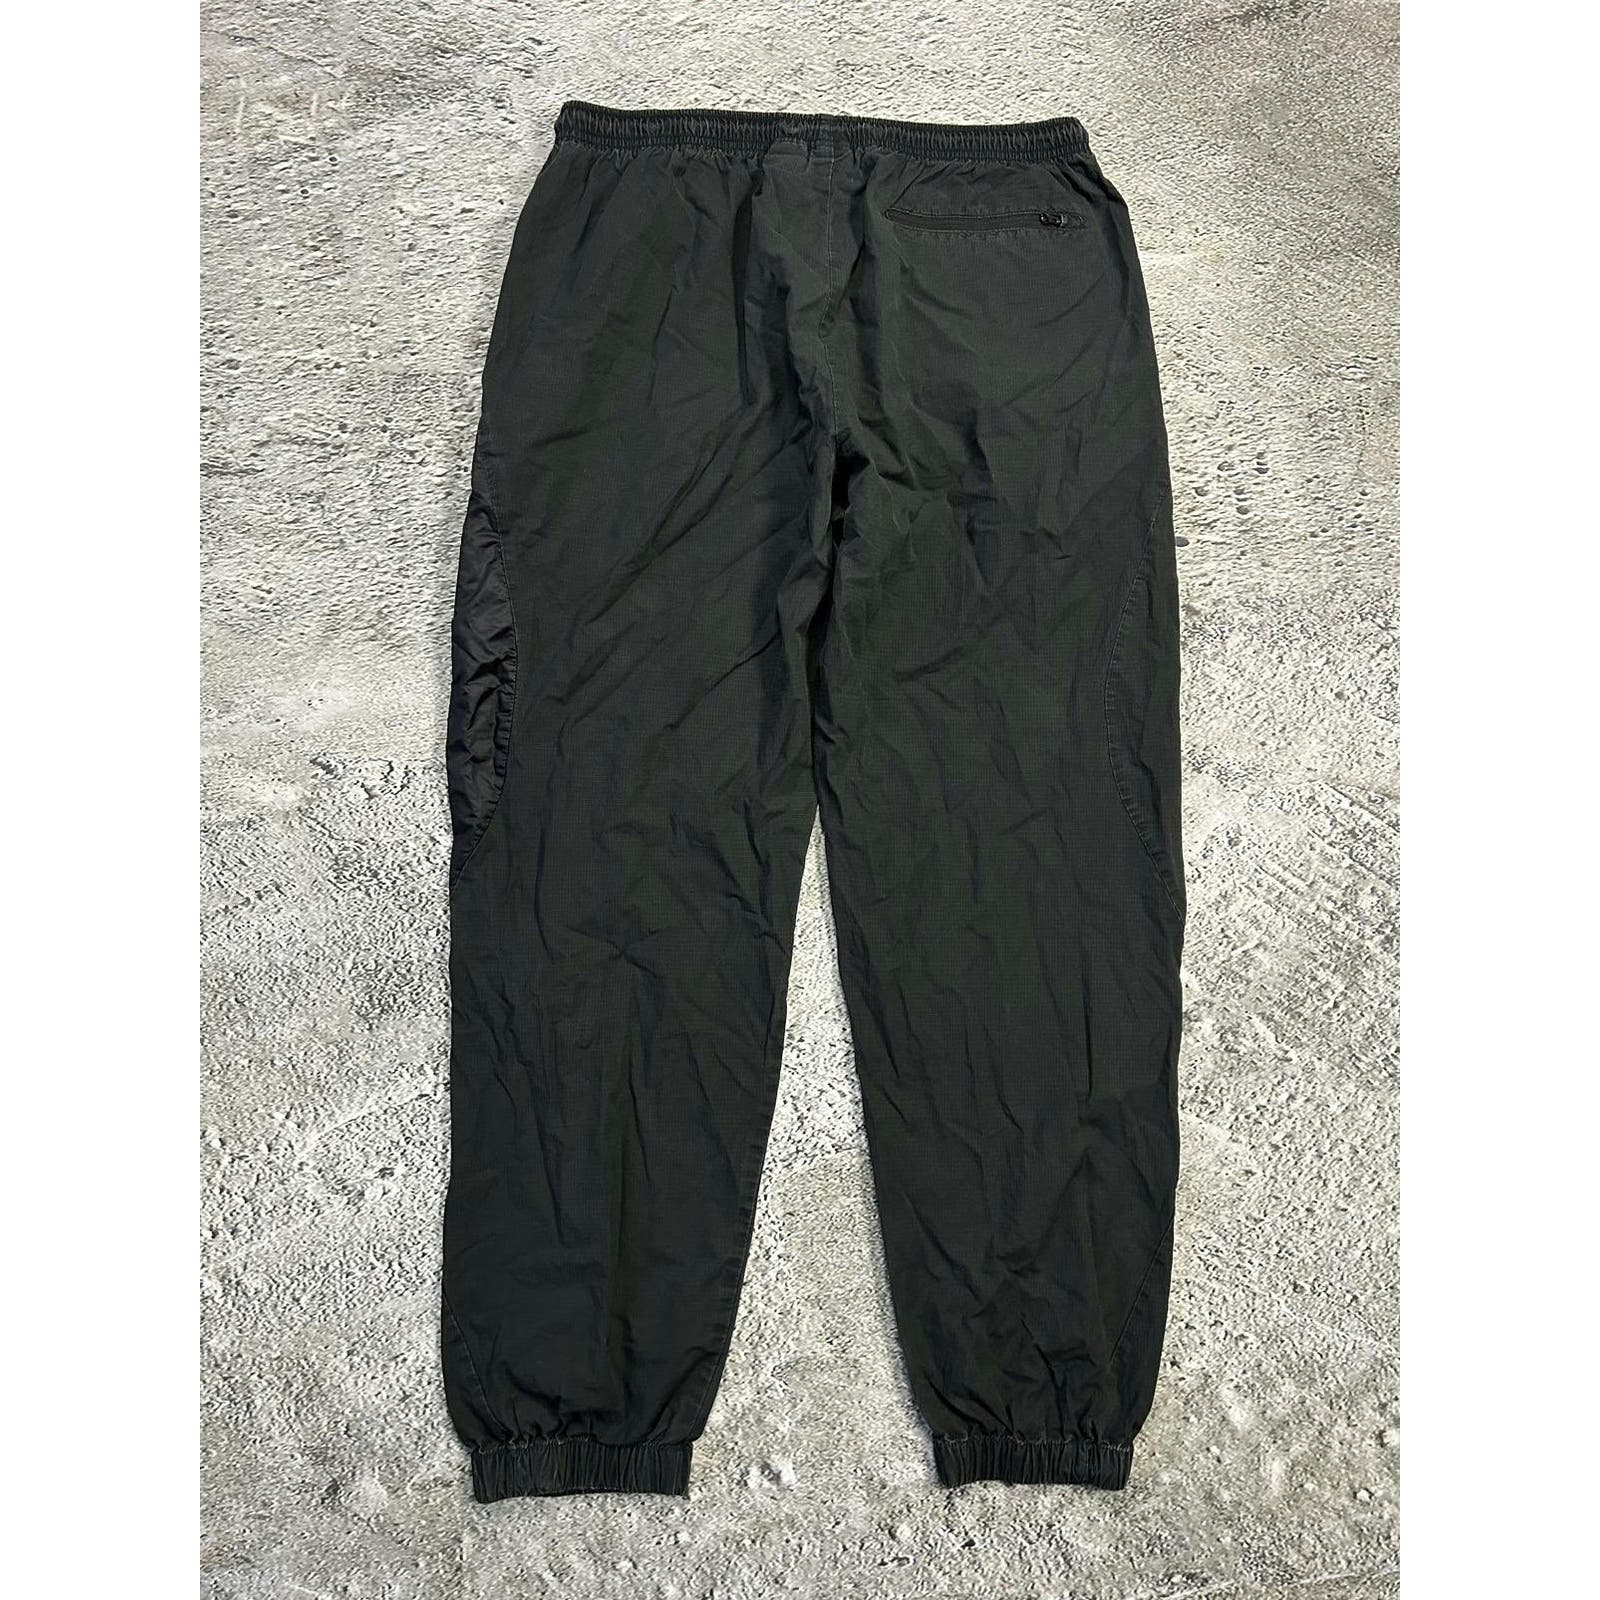 Nike vintage black parachute pants 2000s cargo drill Y2K – Refitted